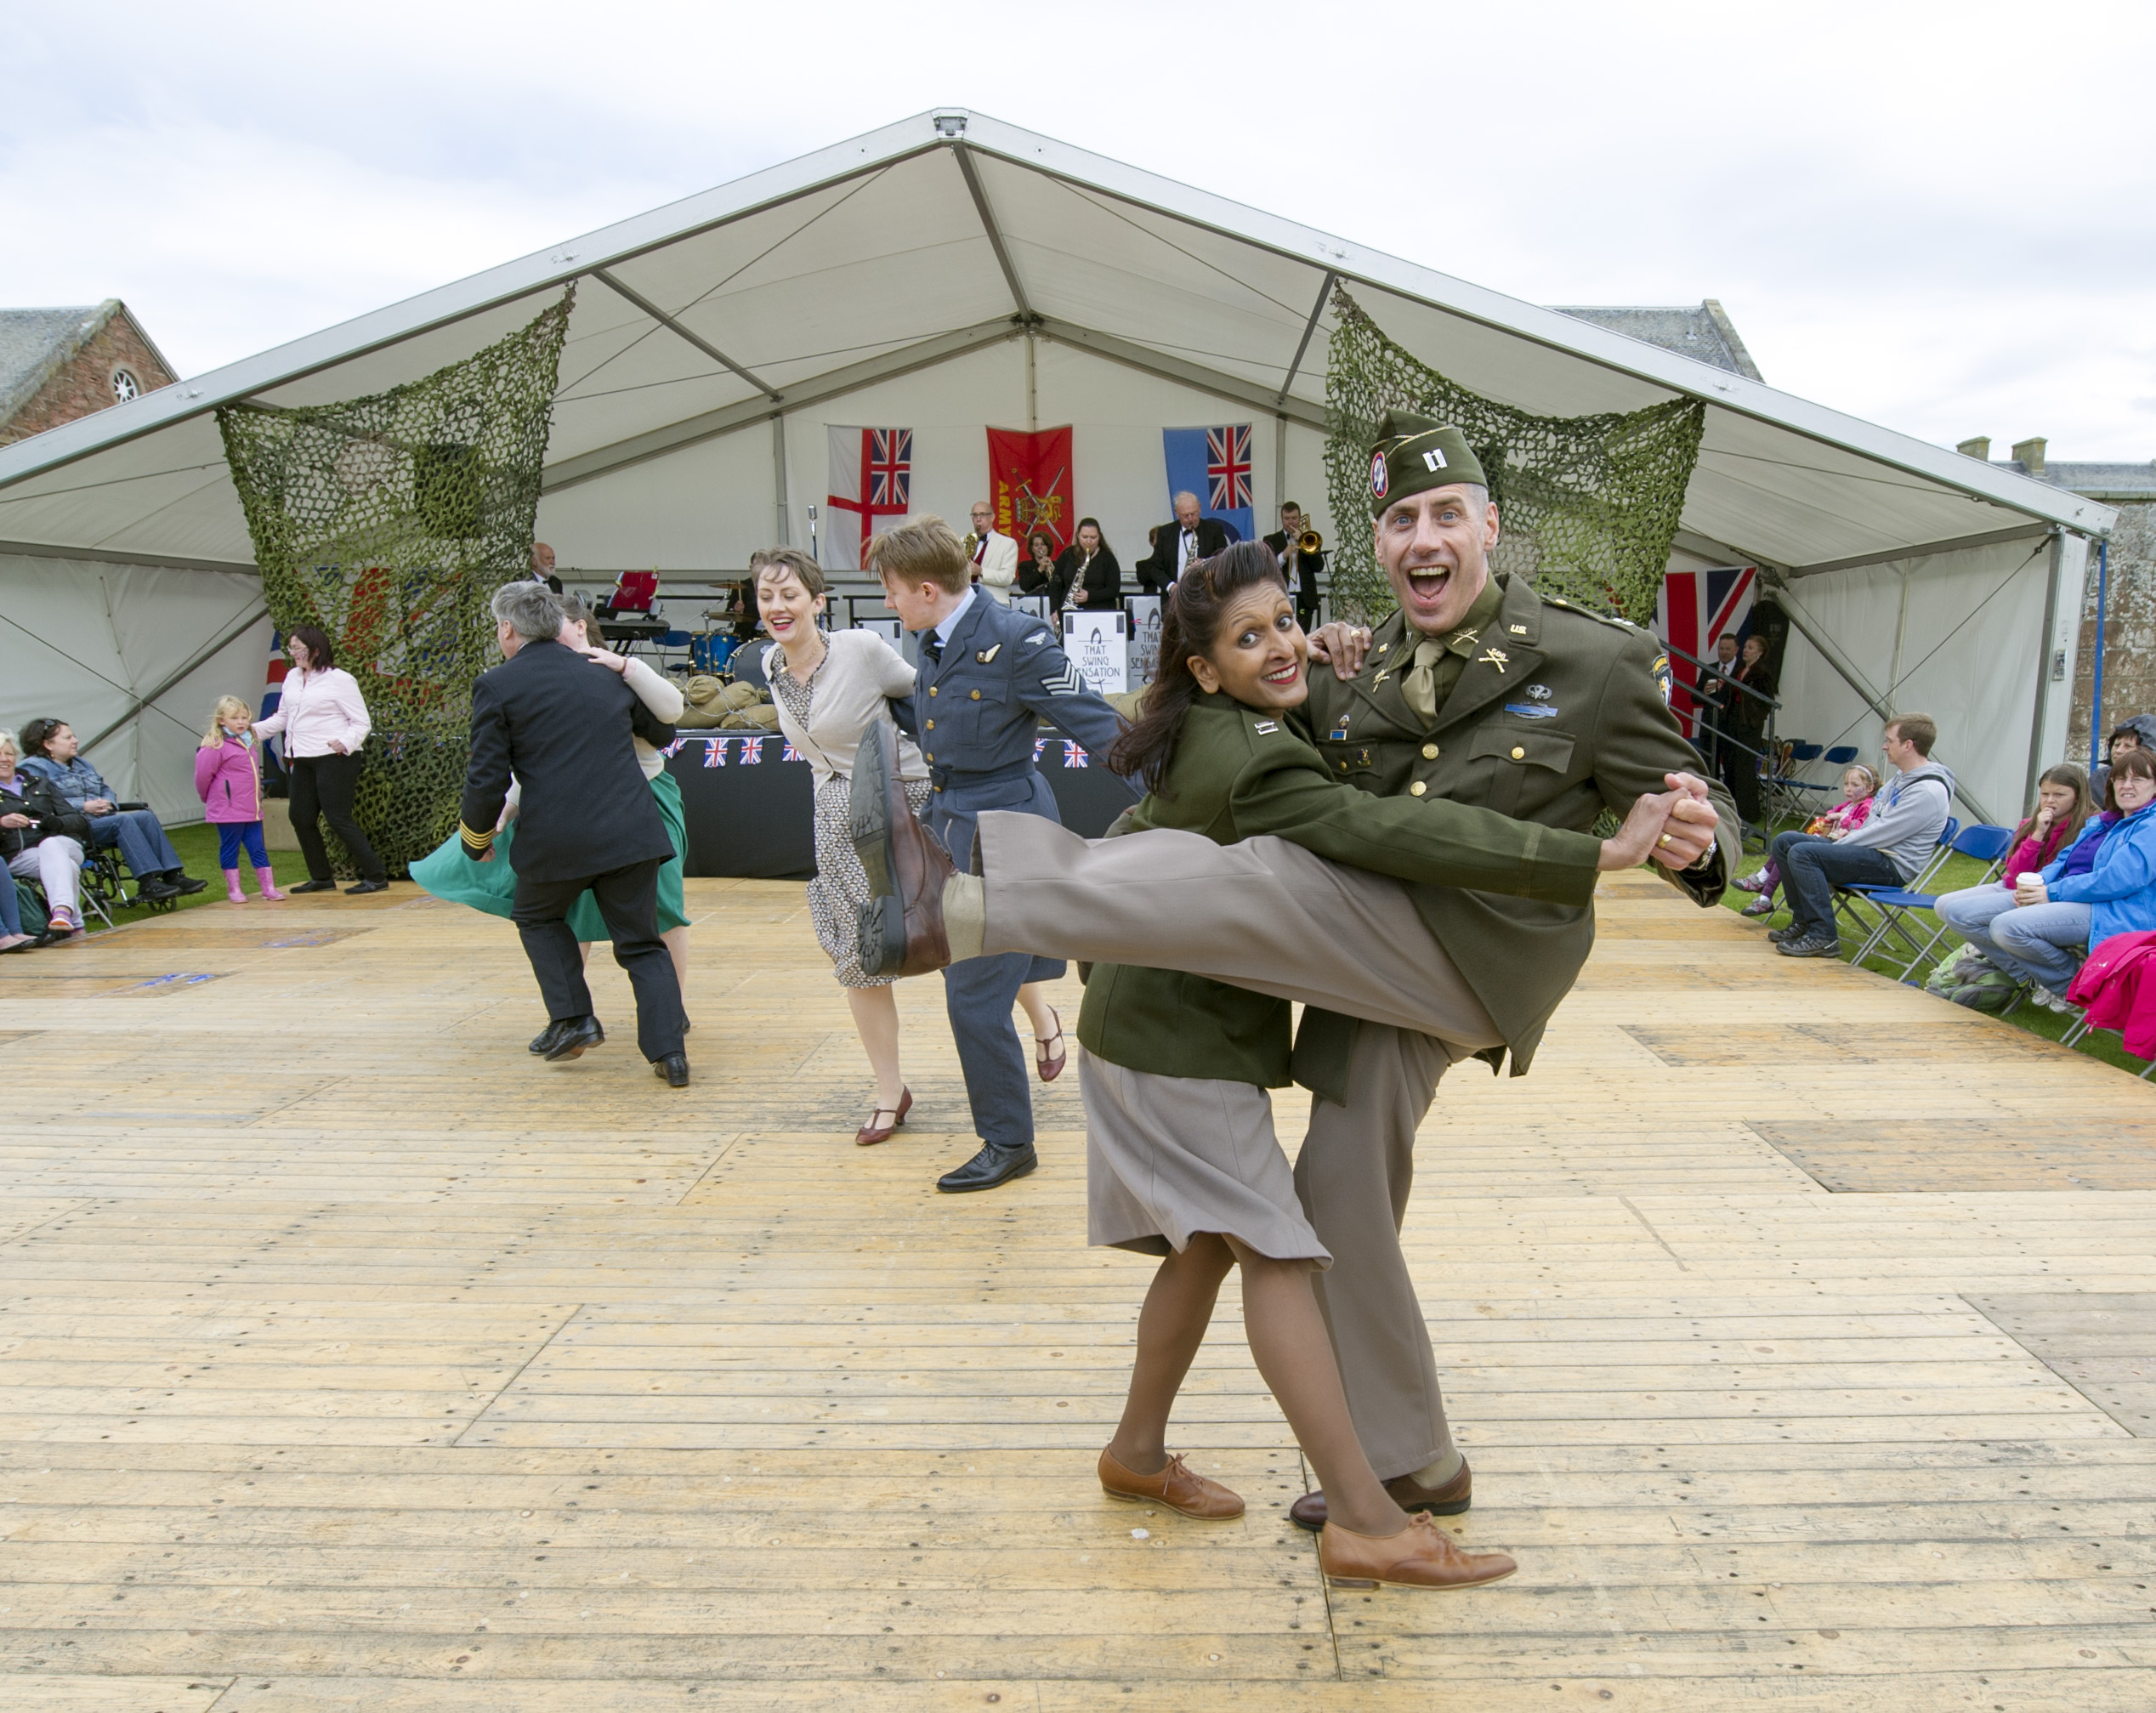 An image of two people dressed in re-enactment army clothes dancing in front of a large open tent for Celebration of the Centuries